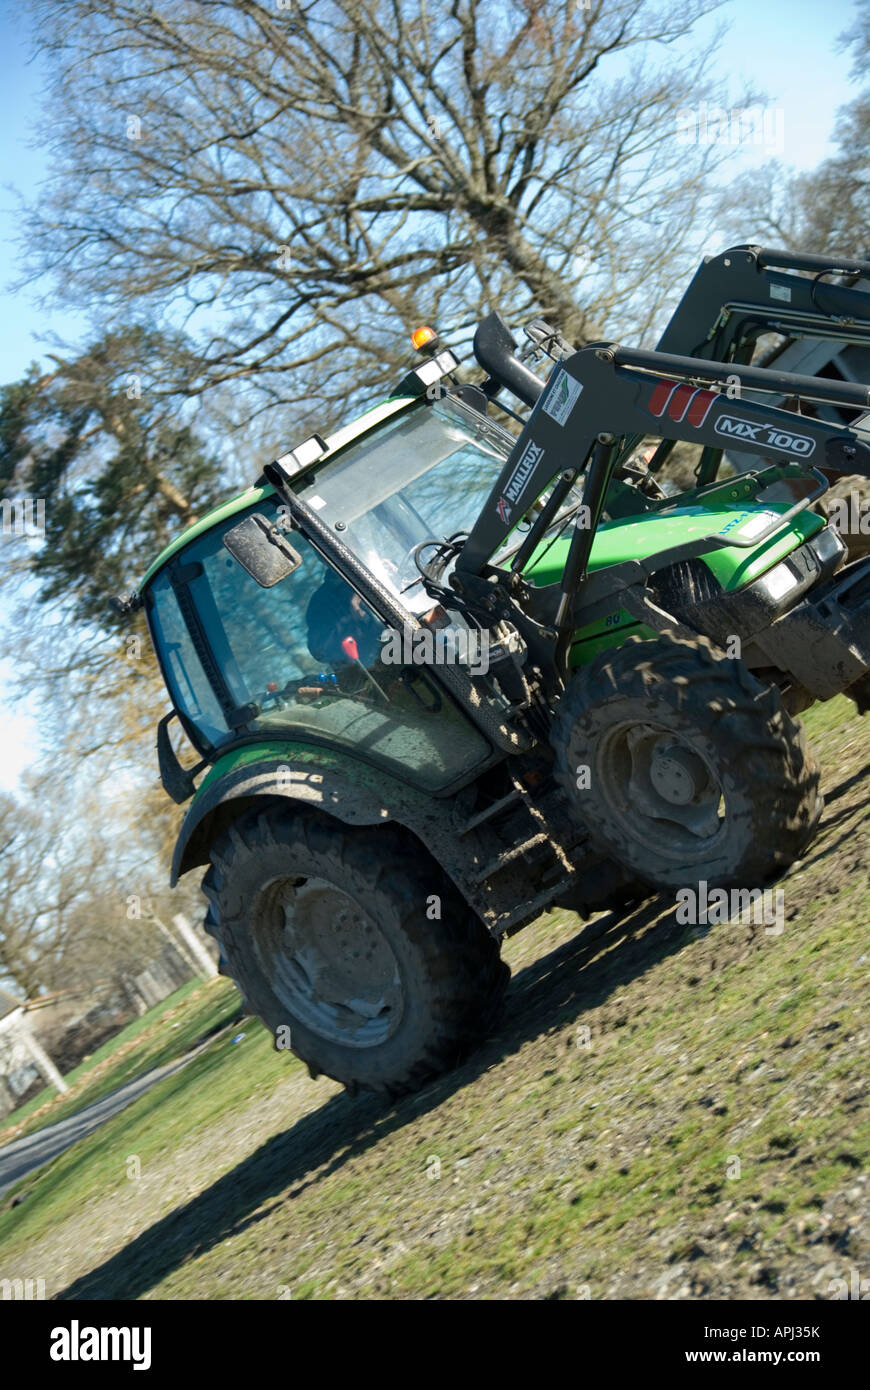 Stock Photo of a Deutz Fahr tractor The photo was taken in the Limousin region of France Stock Photo